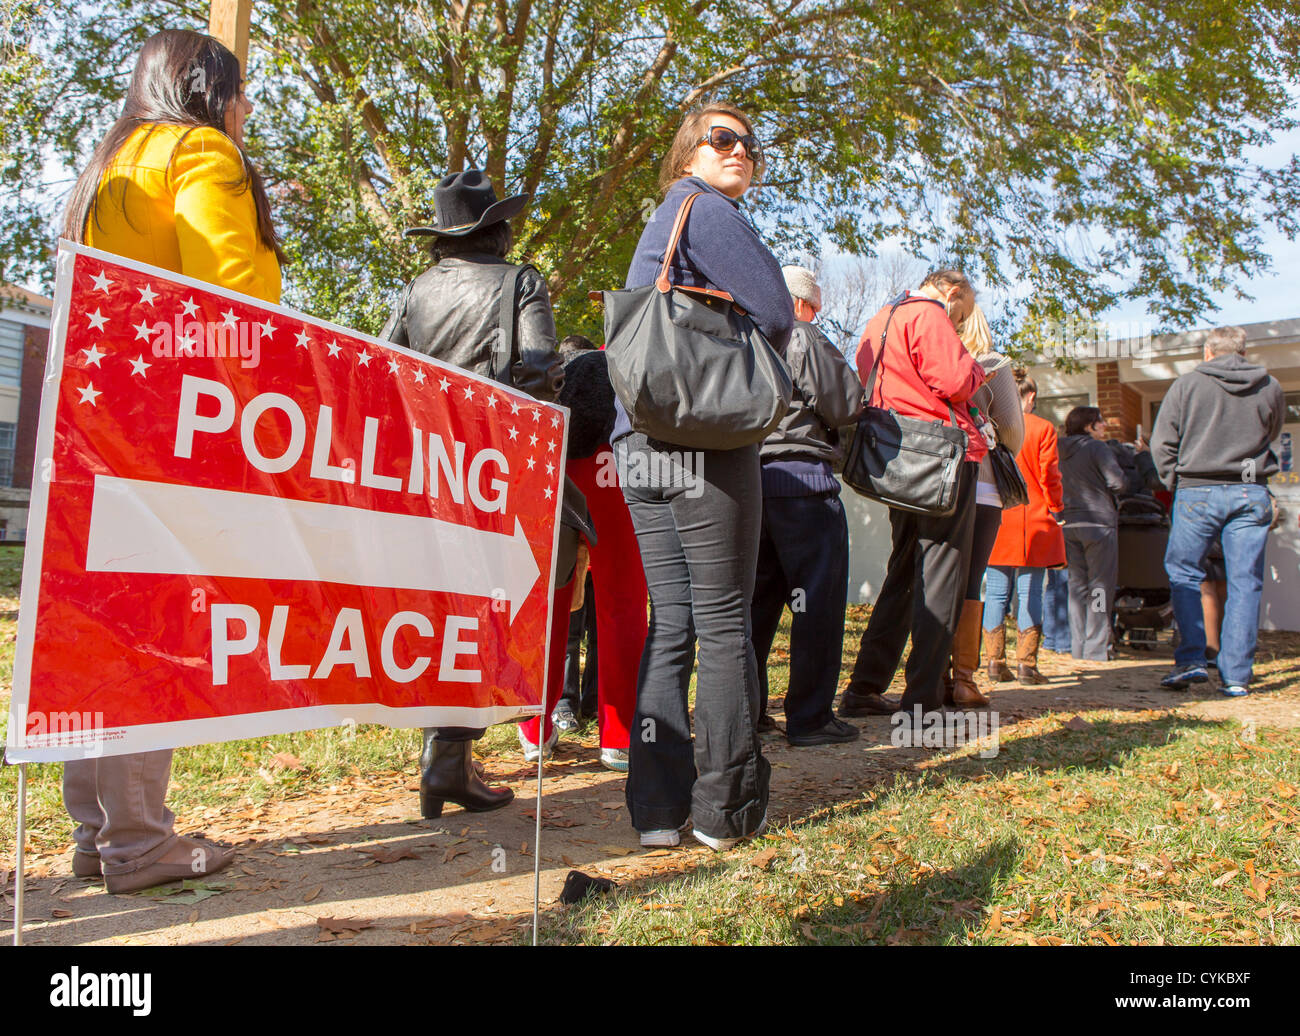 ARLINGTON, VIRGINIA, USA. 6th November, 2012. People line up to vote during 2012 Presidential election, Precinct 19. Stock Photo